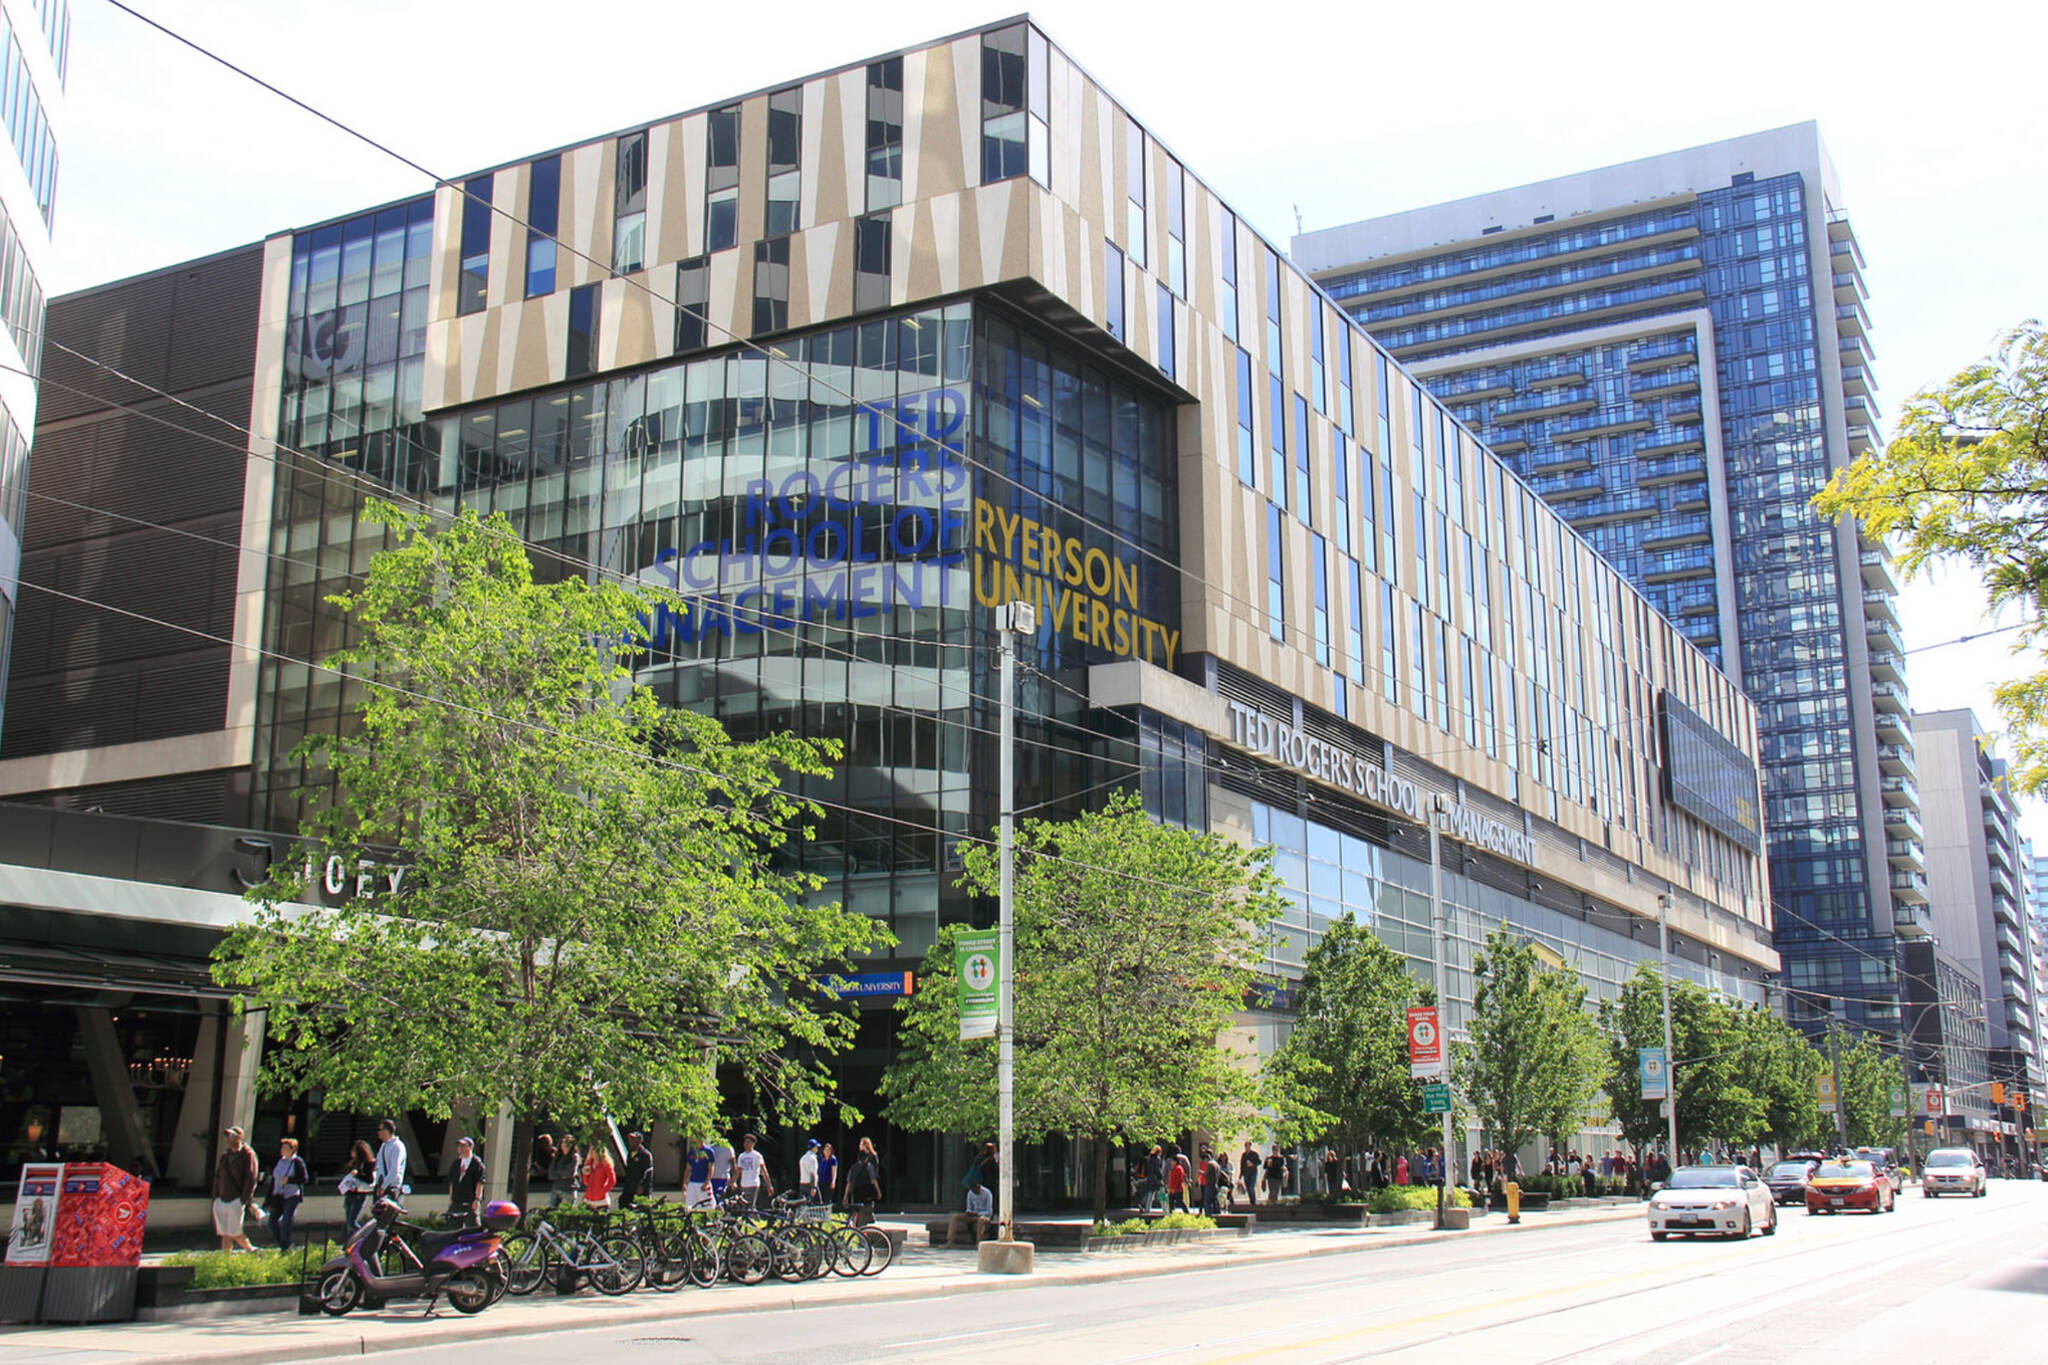 The 43+ Facts About Ryerson University Downtown Toronto? An urban